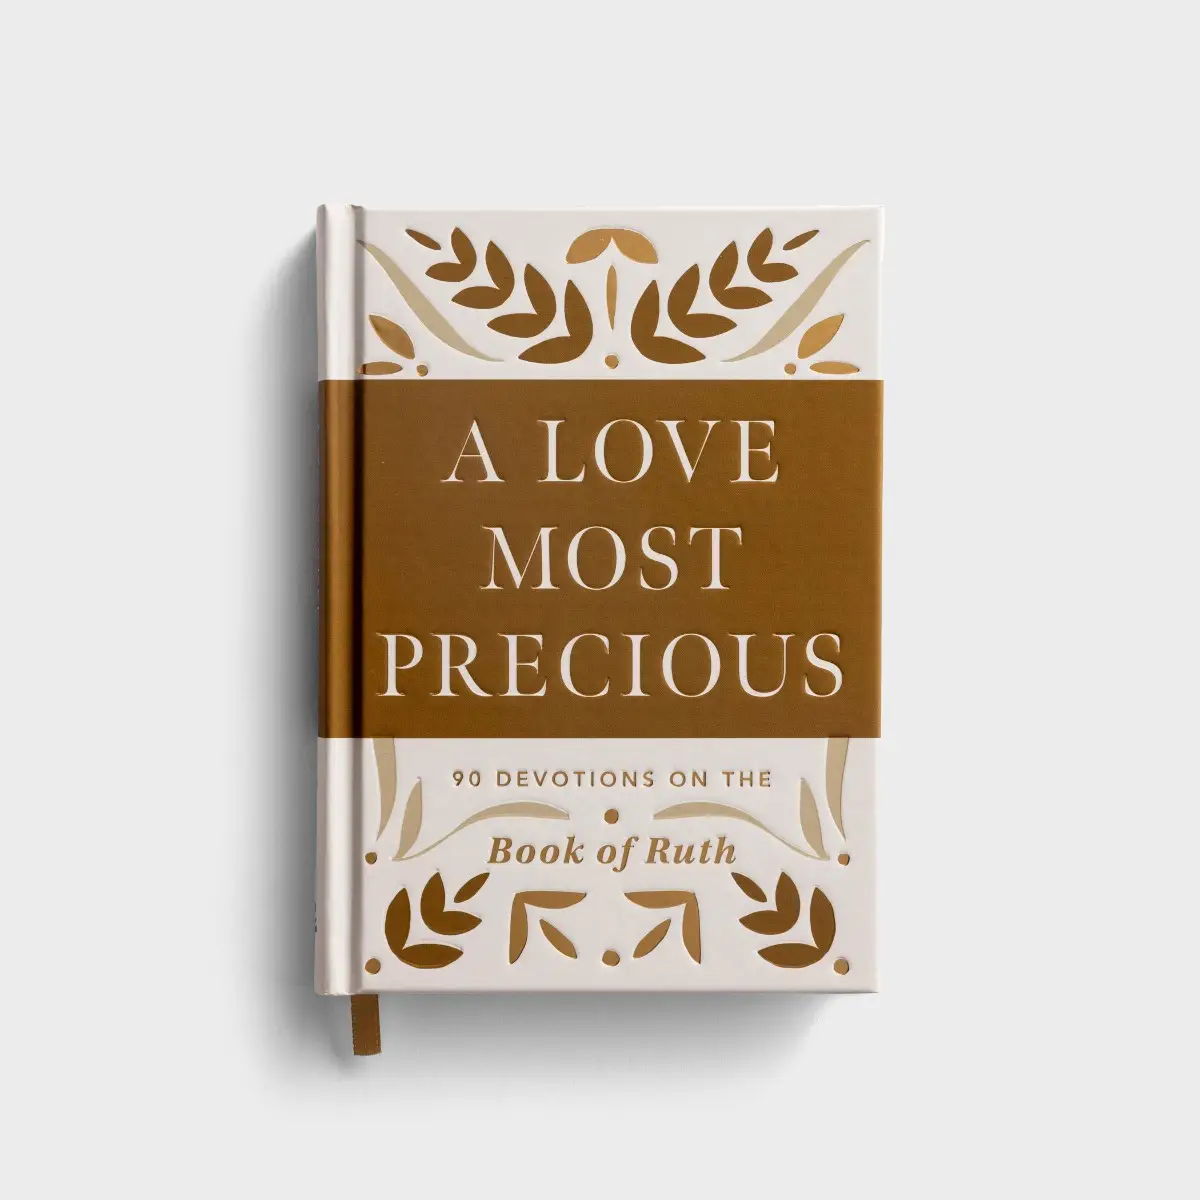 A Love Most Precious: 90 Devotions on the Book of Ruth (hardcover)